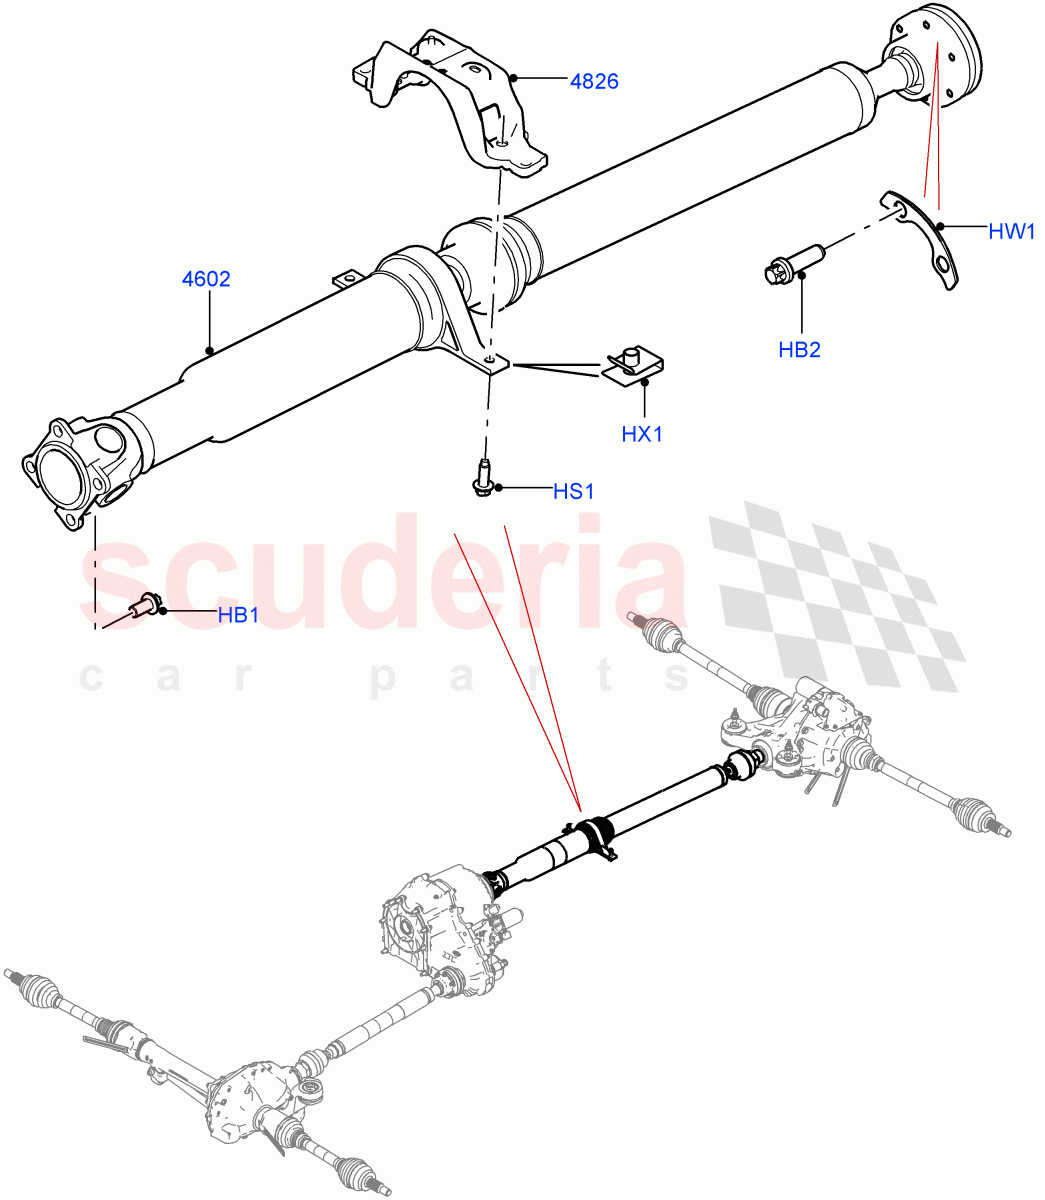 Drive Shaft - Rear Axle Drive(Solihull Plant Build, Propshaft)((V)FROMHA000001) of Land Rover Land Rover Discovery 5 (2017+) [3.0 Diesel 24V DOHC TC]